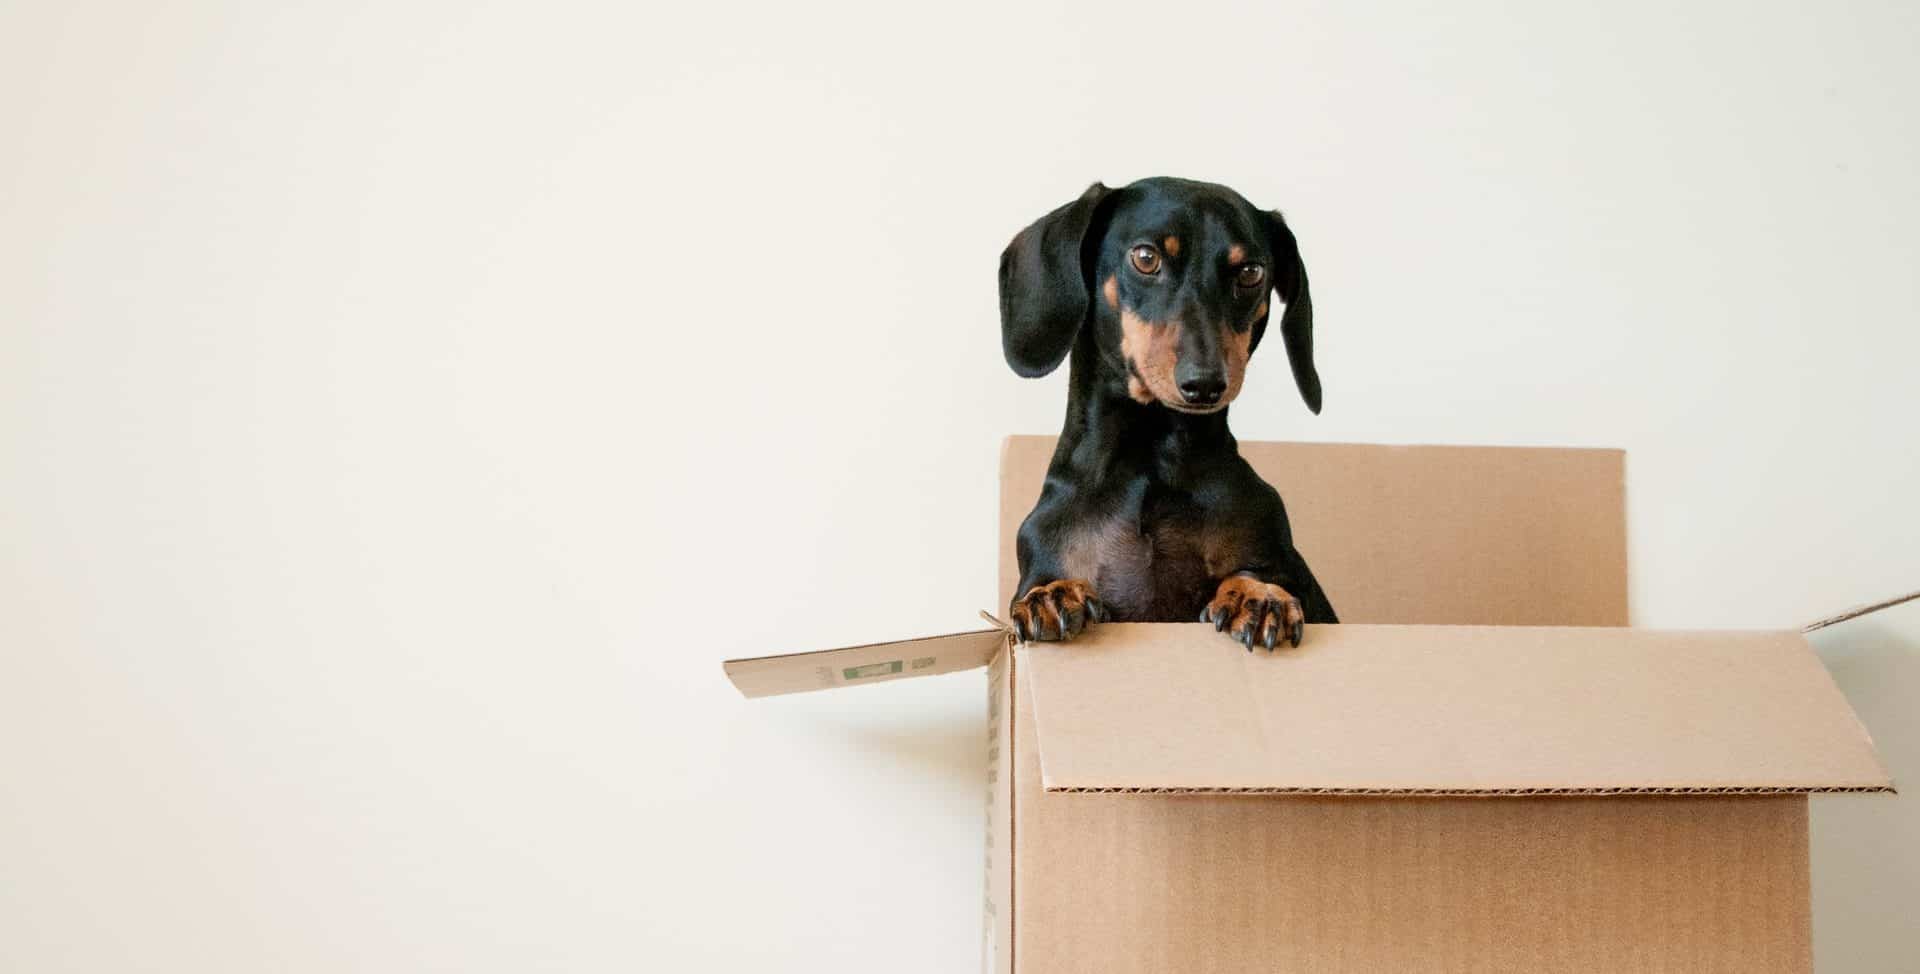 10 Dog Moving Tips to Help Your Pets Settle In Your New Home Easier